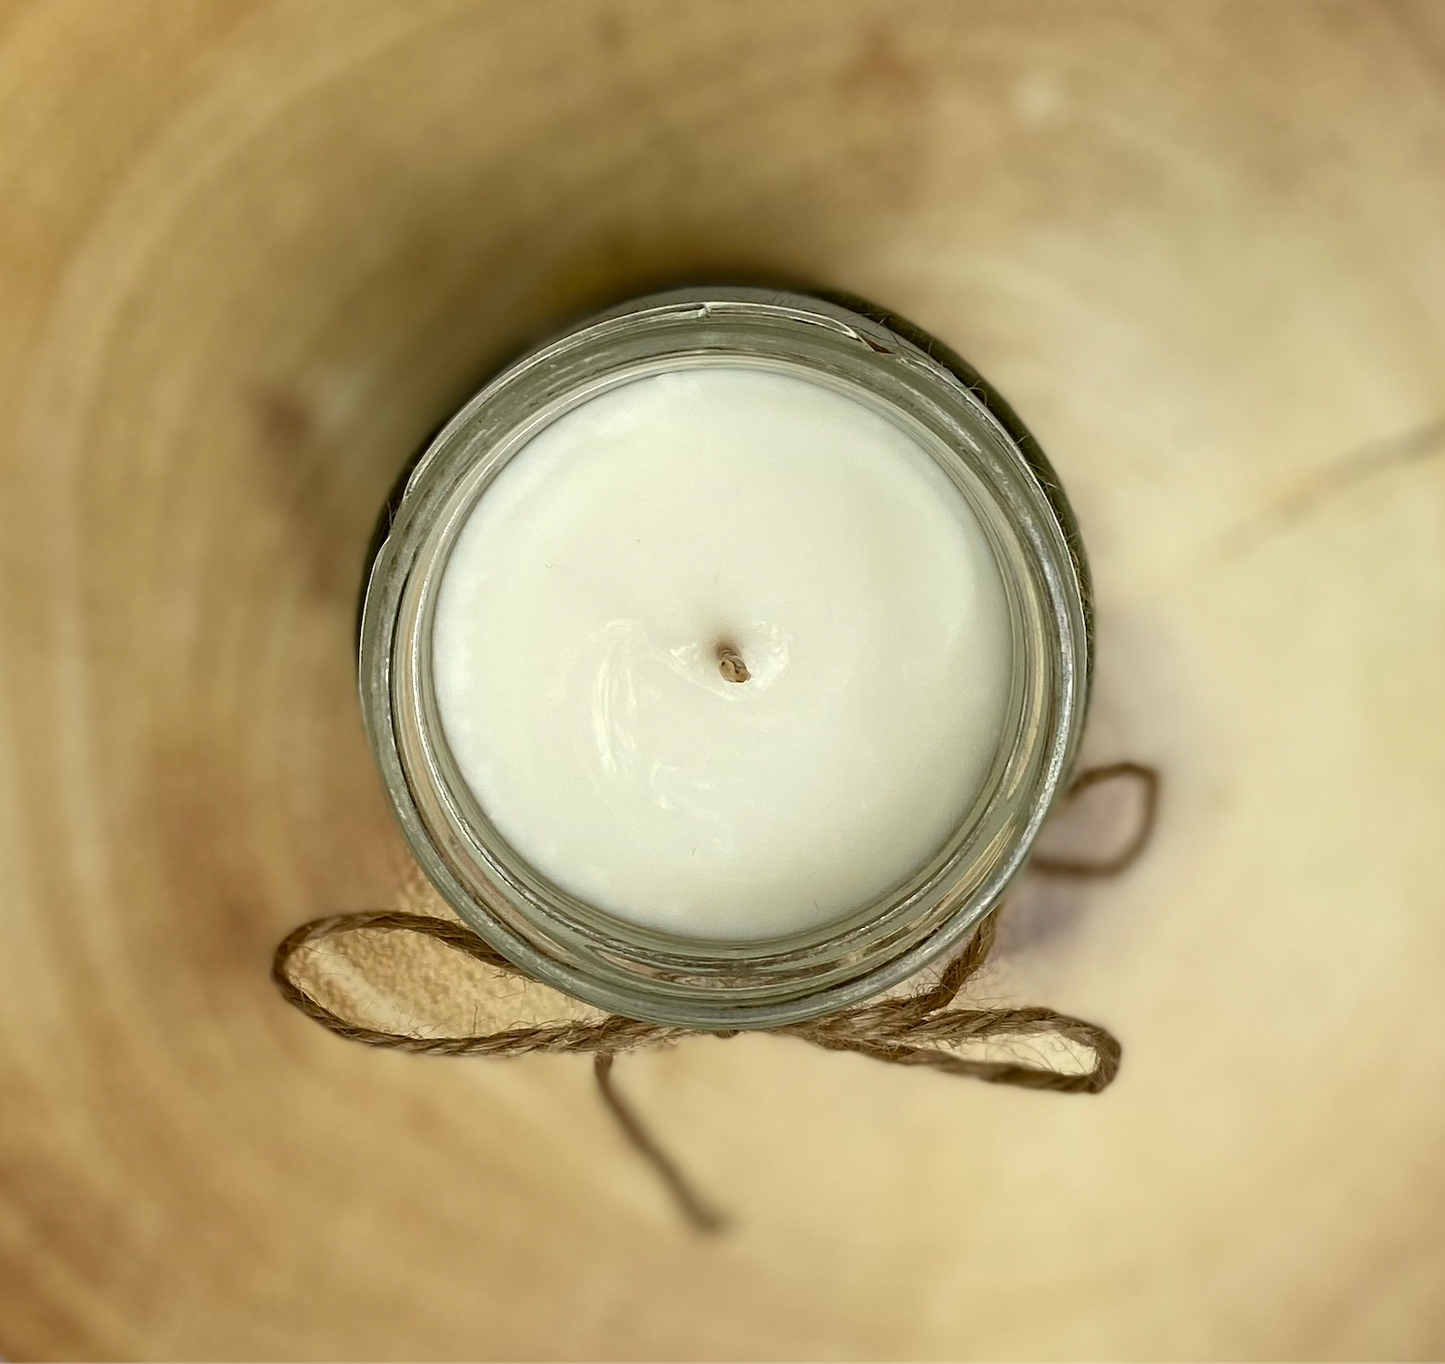 Rock Salt & Driftwood Scented Soy Wax Candle - Lanji Candles